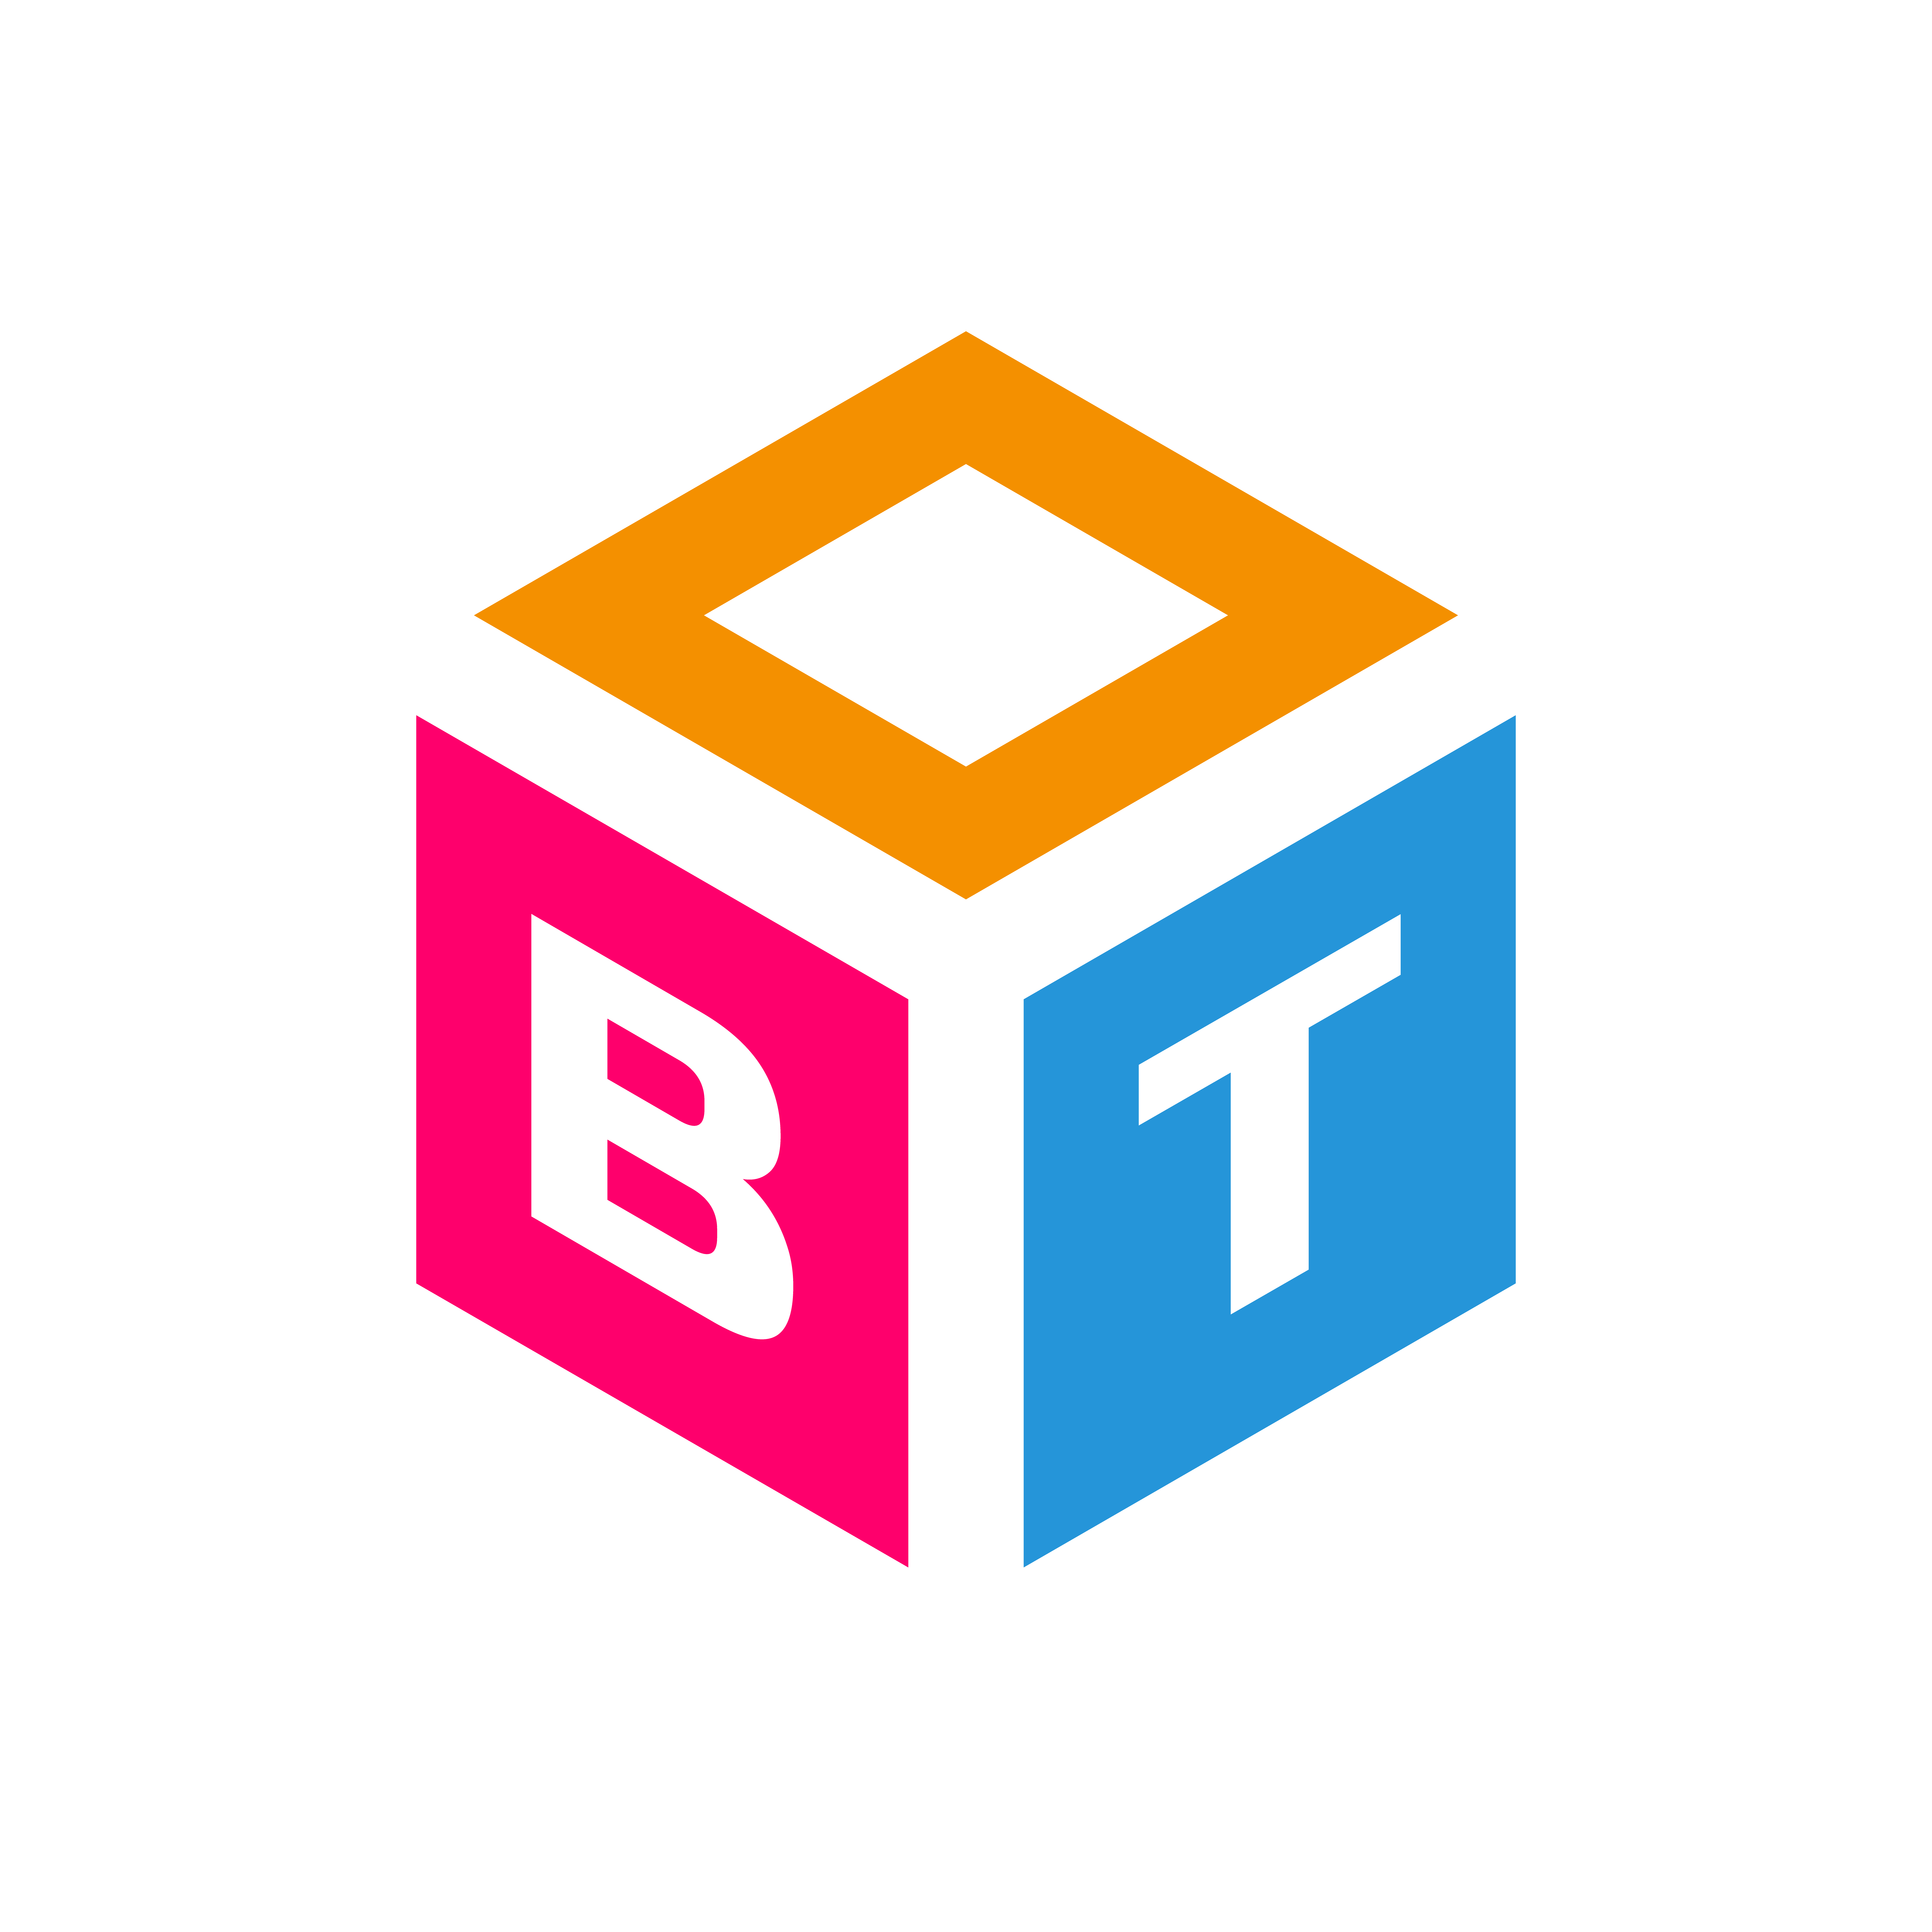 BloxTrade: Contact Details and Business Profile